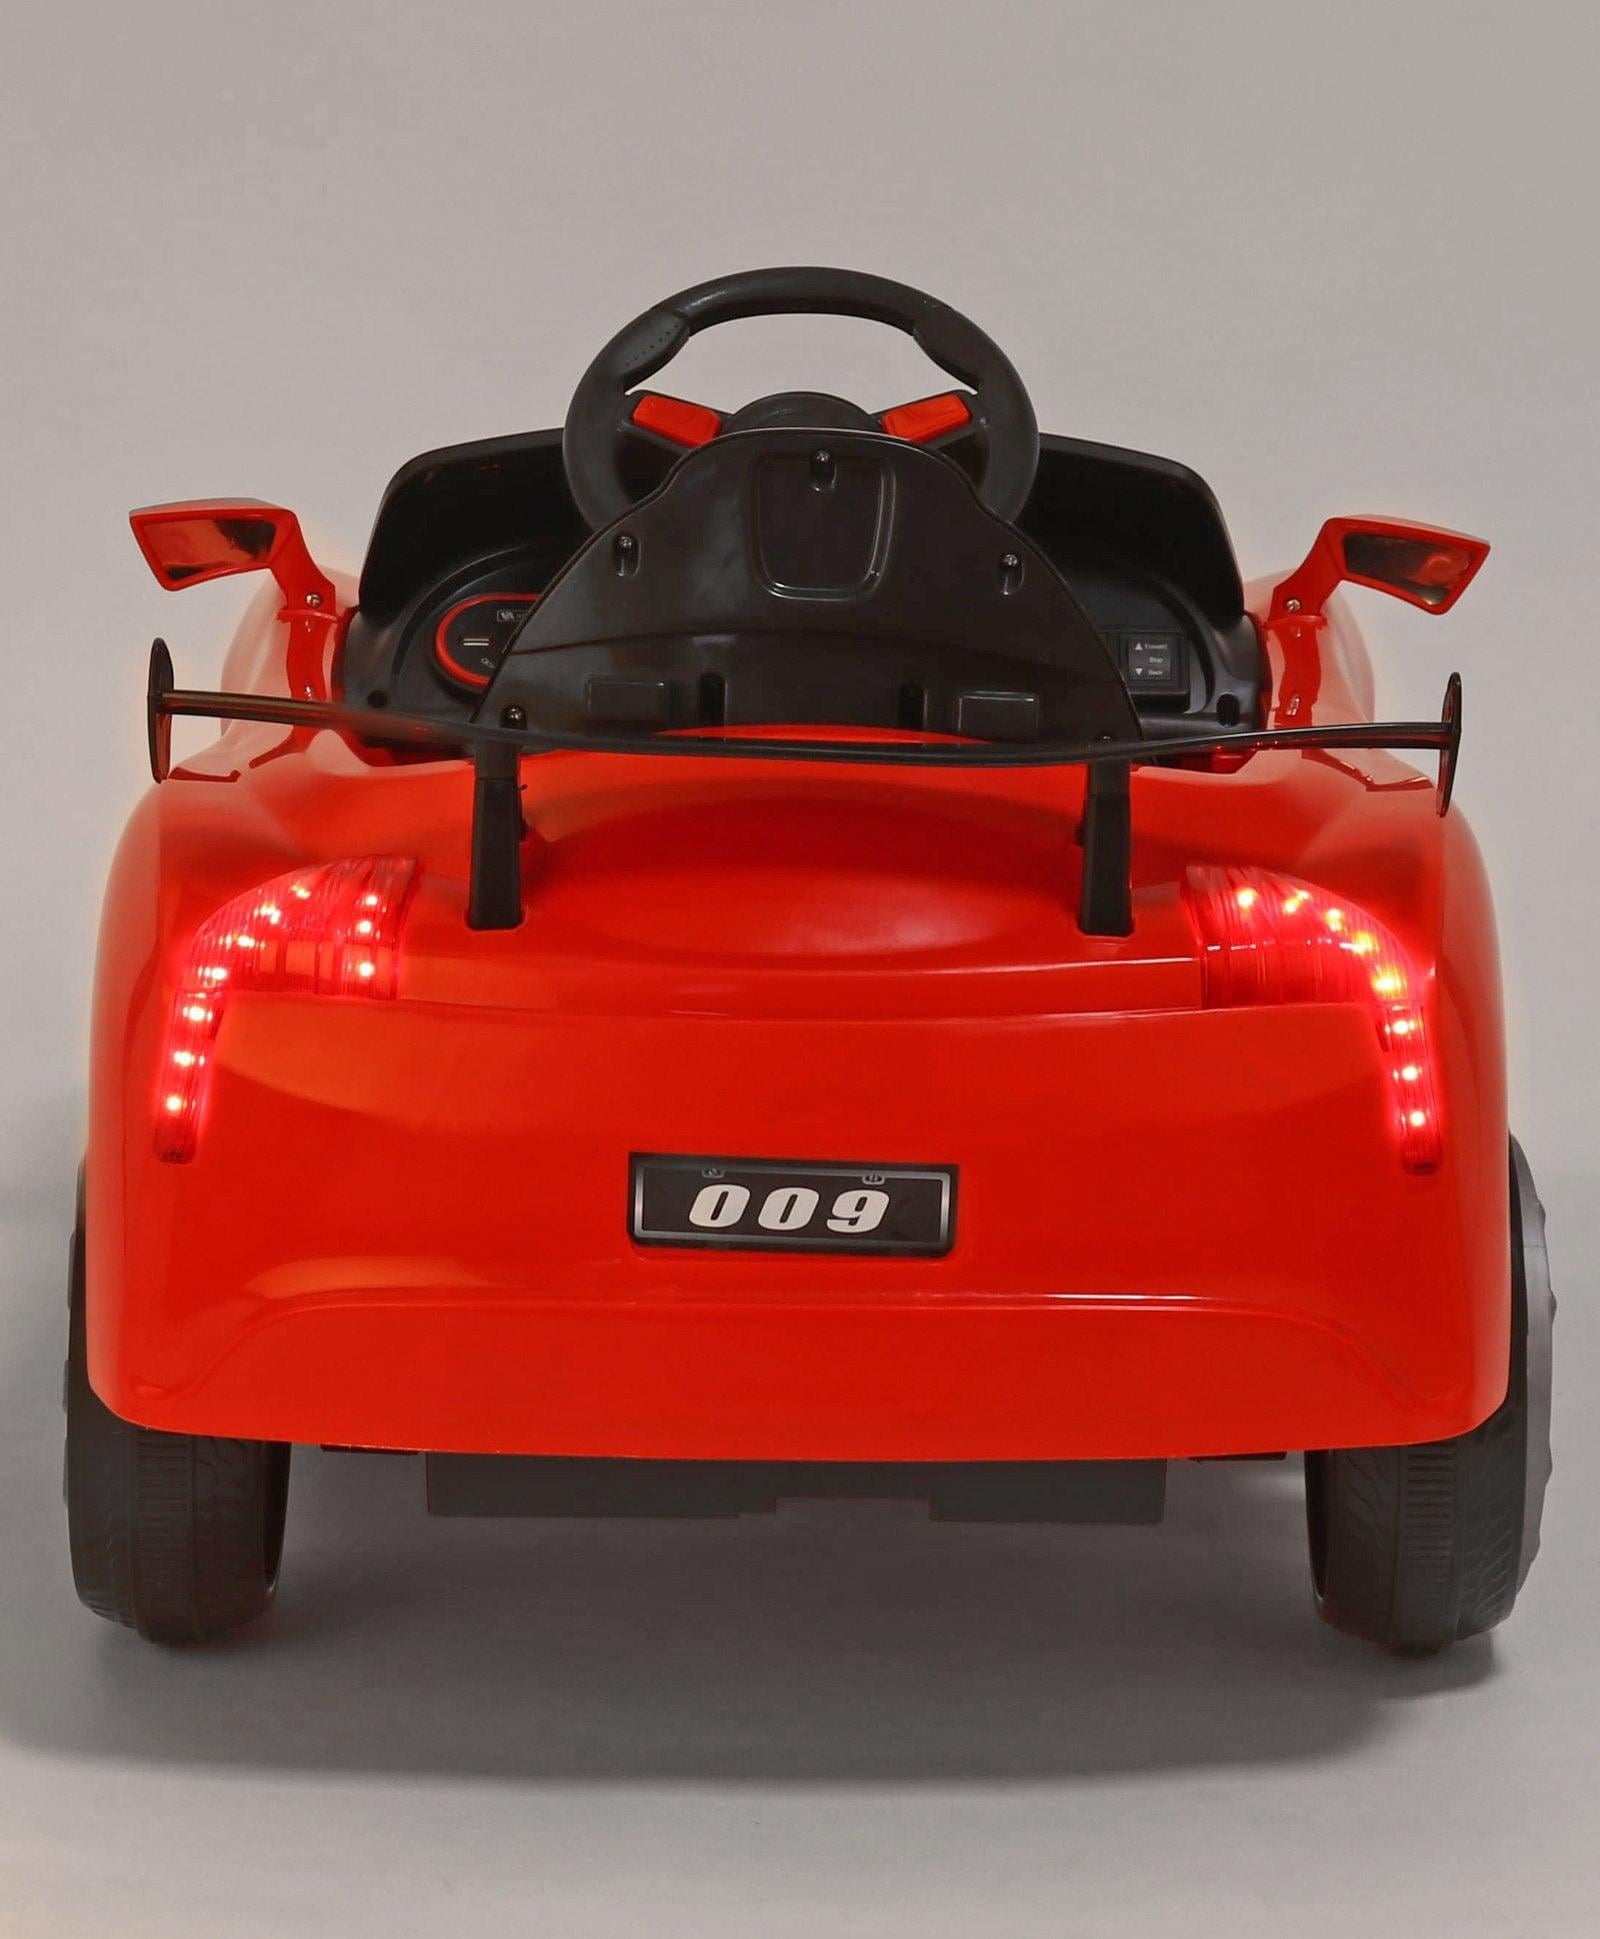 1189 Battery Operated Smooth Ride on Toy Car for Kids with Backrest and Remote - 11Cart